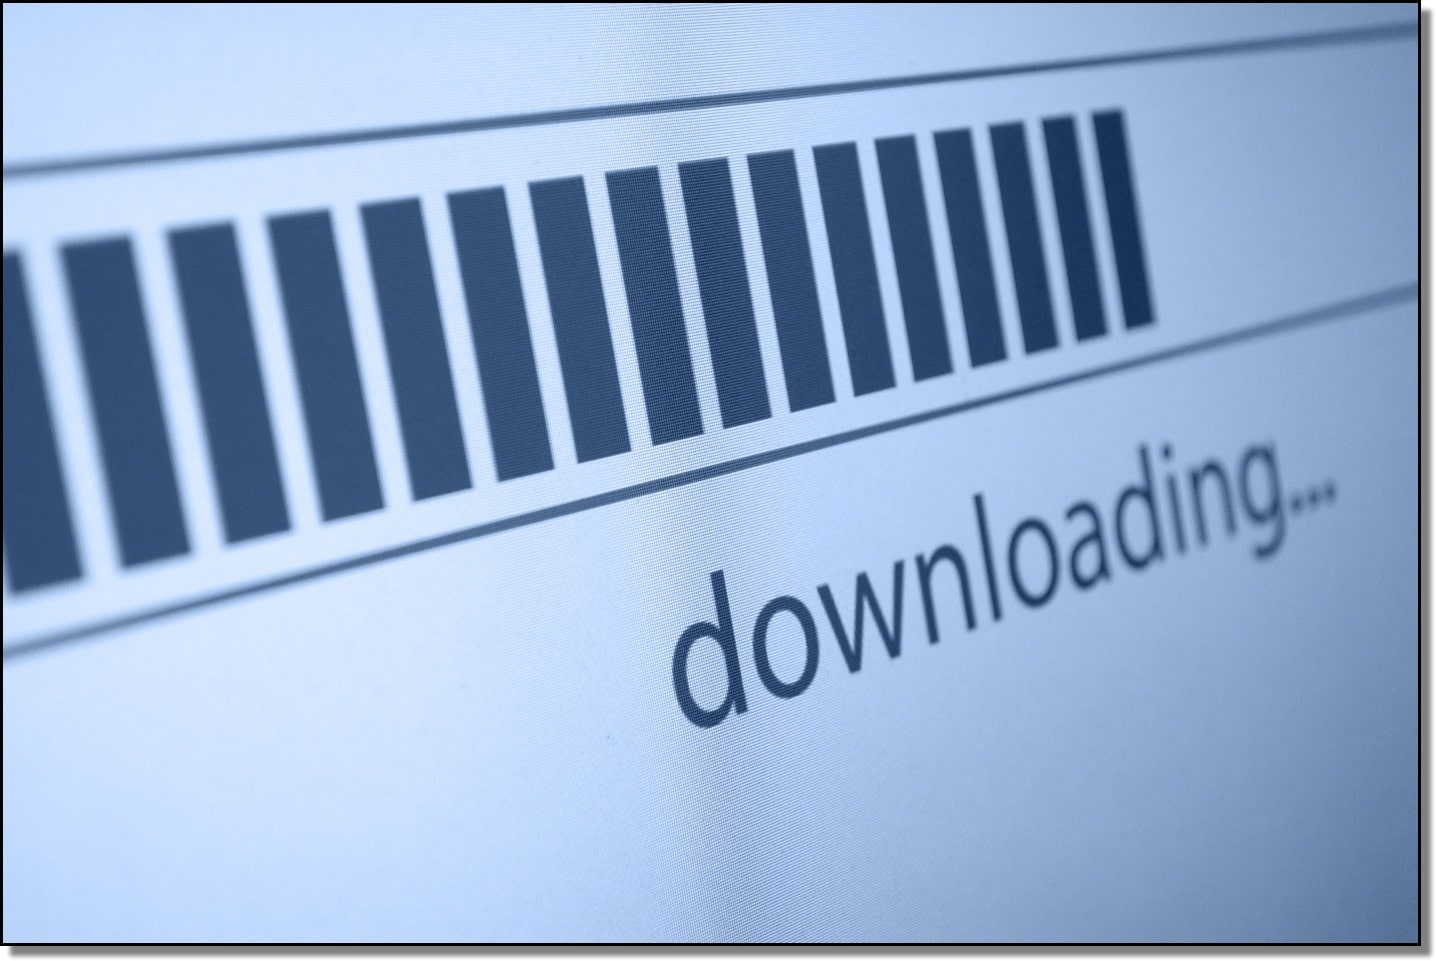 Mumbai Police Movie Download Utorrent: Is it Safe and Legal?